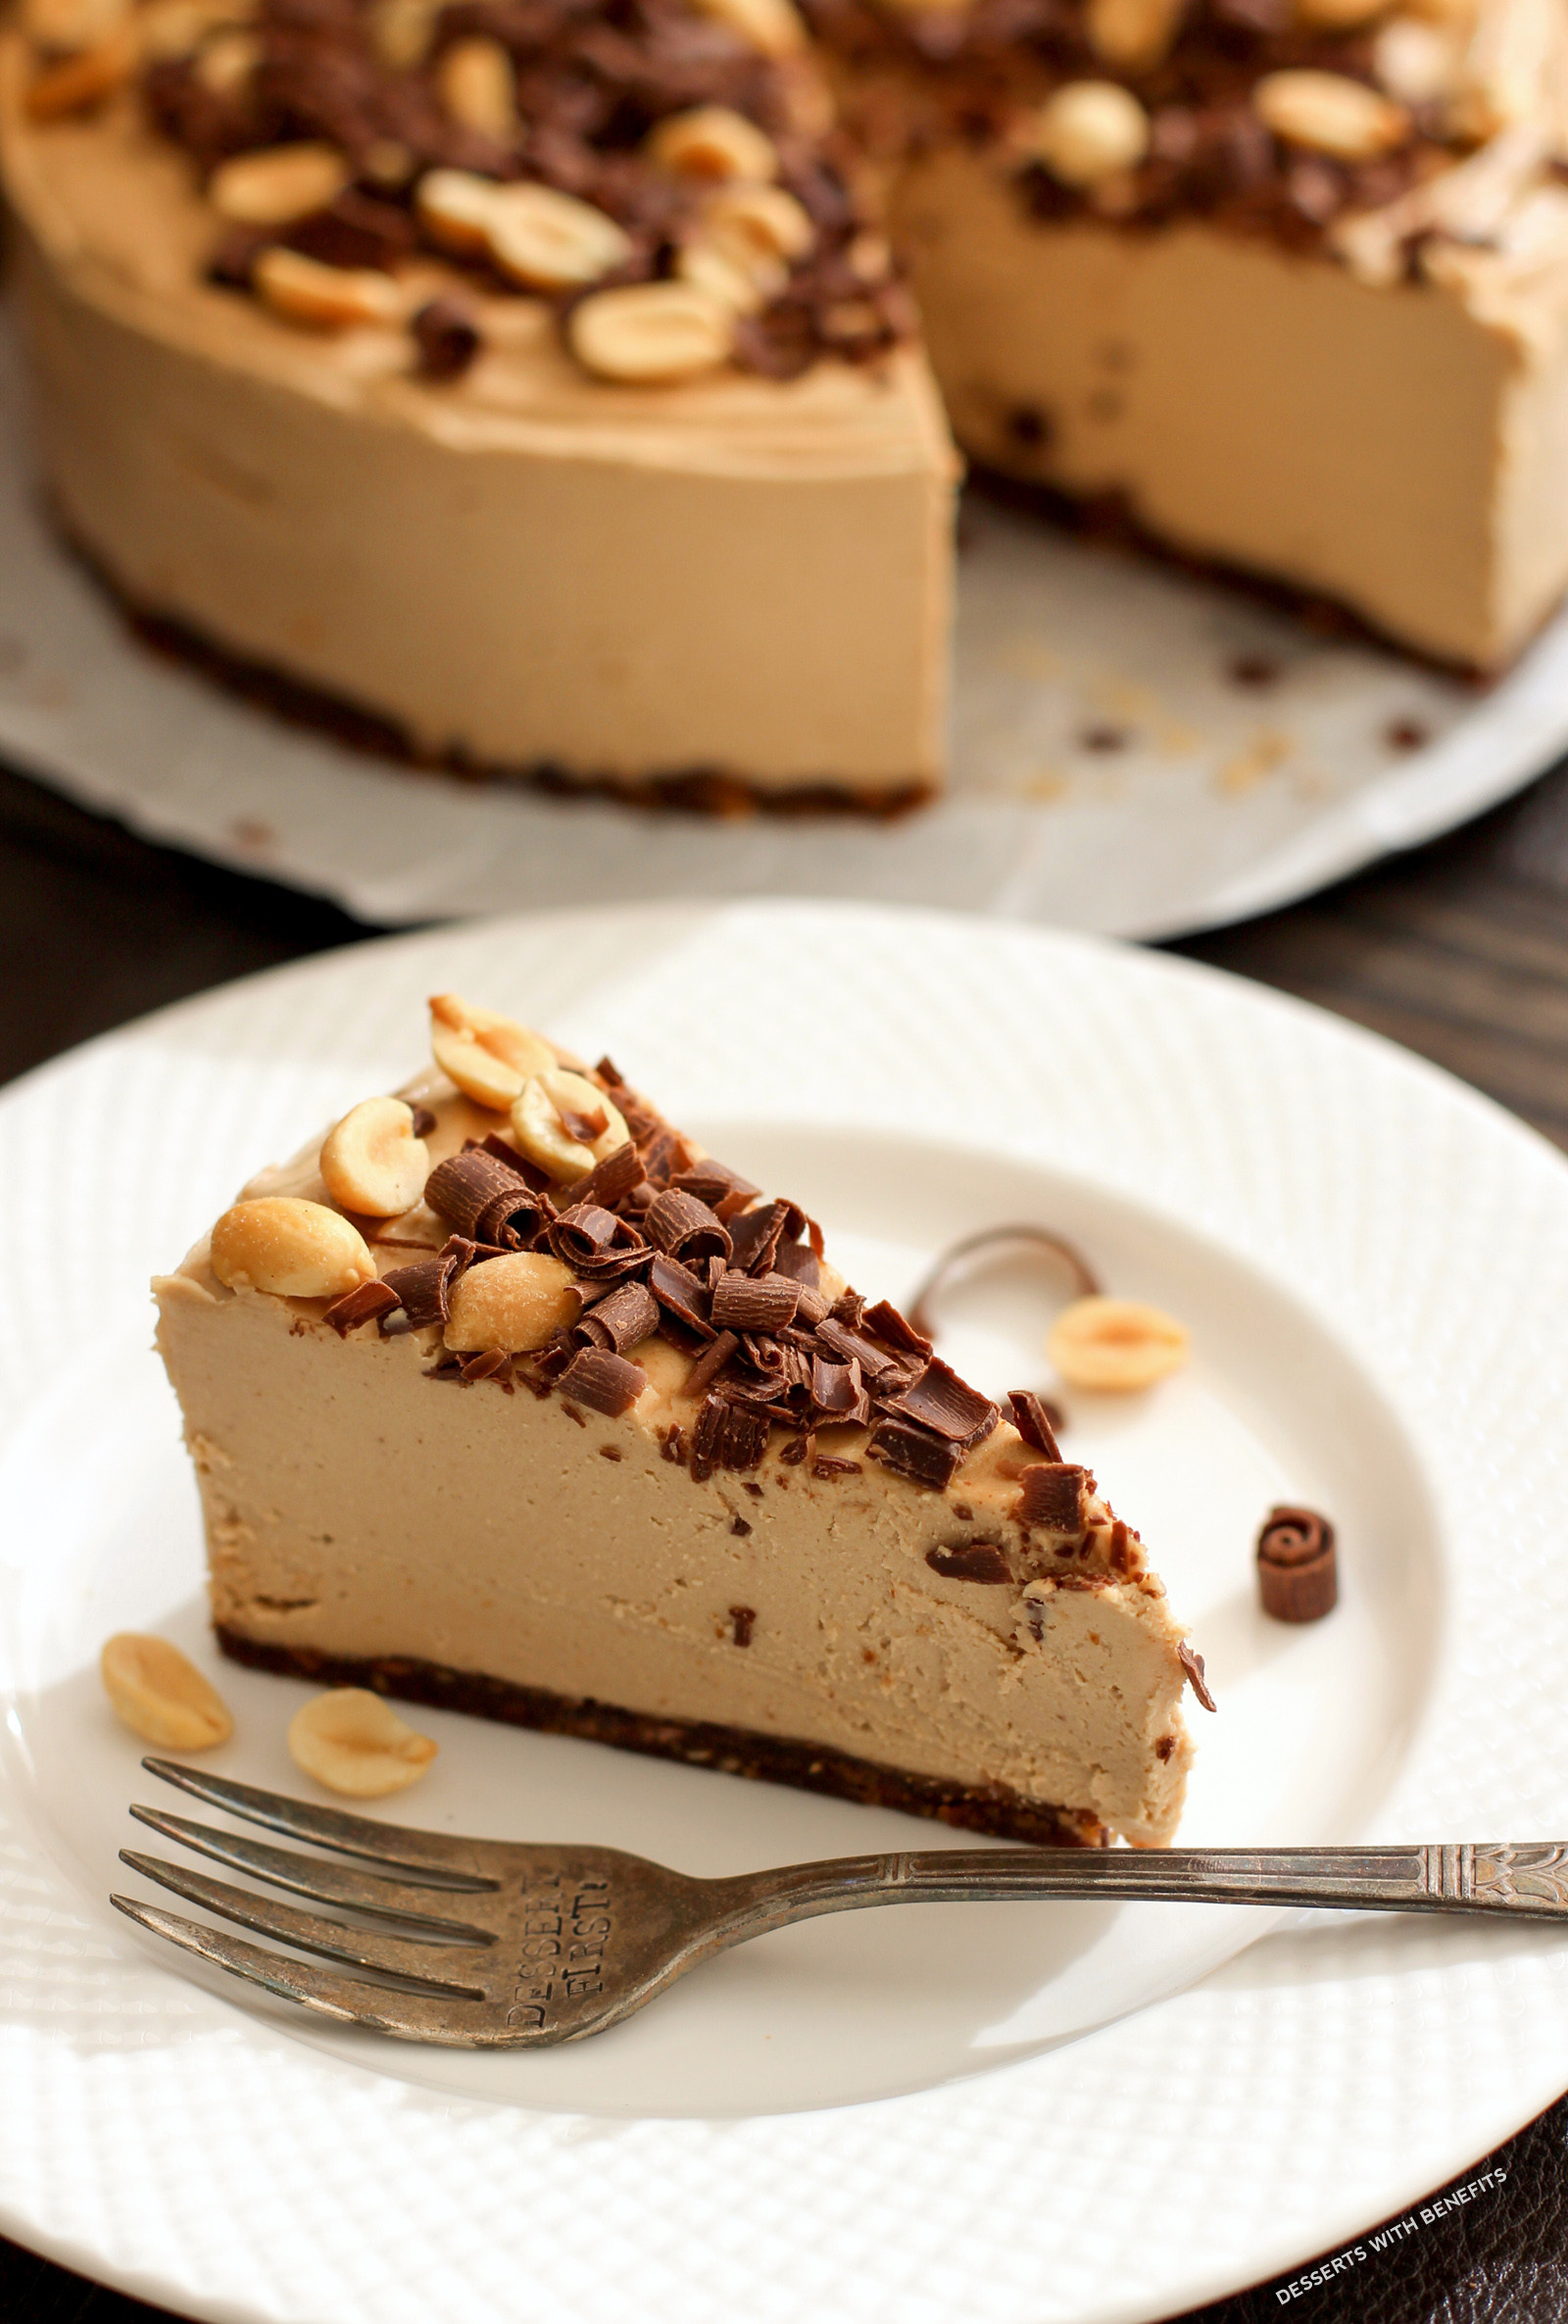 Healthy Baked Desserts Recipes
 Healthy Chocolate Peanut Butter Raw Cheesecake